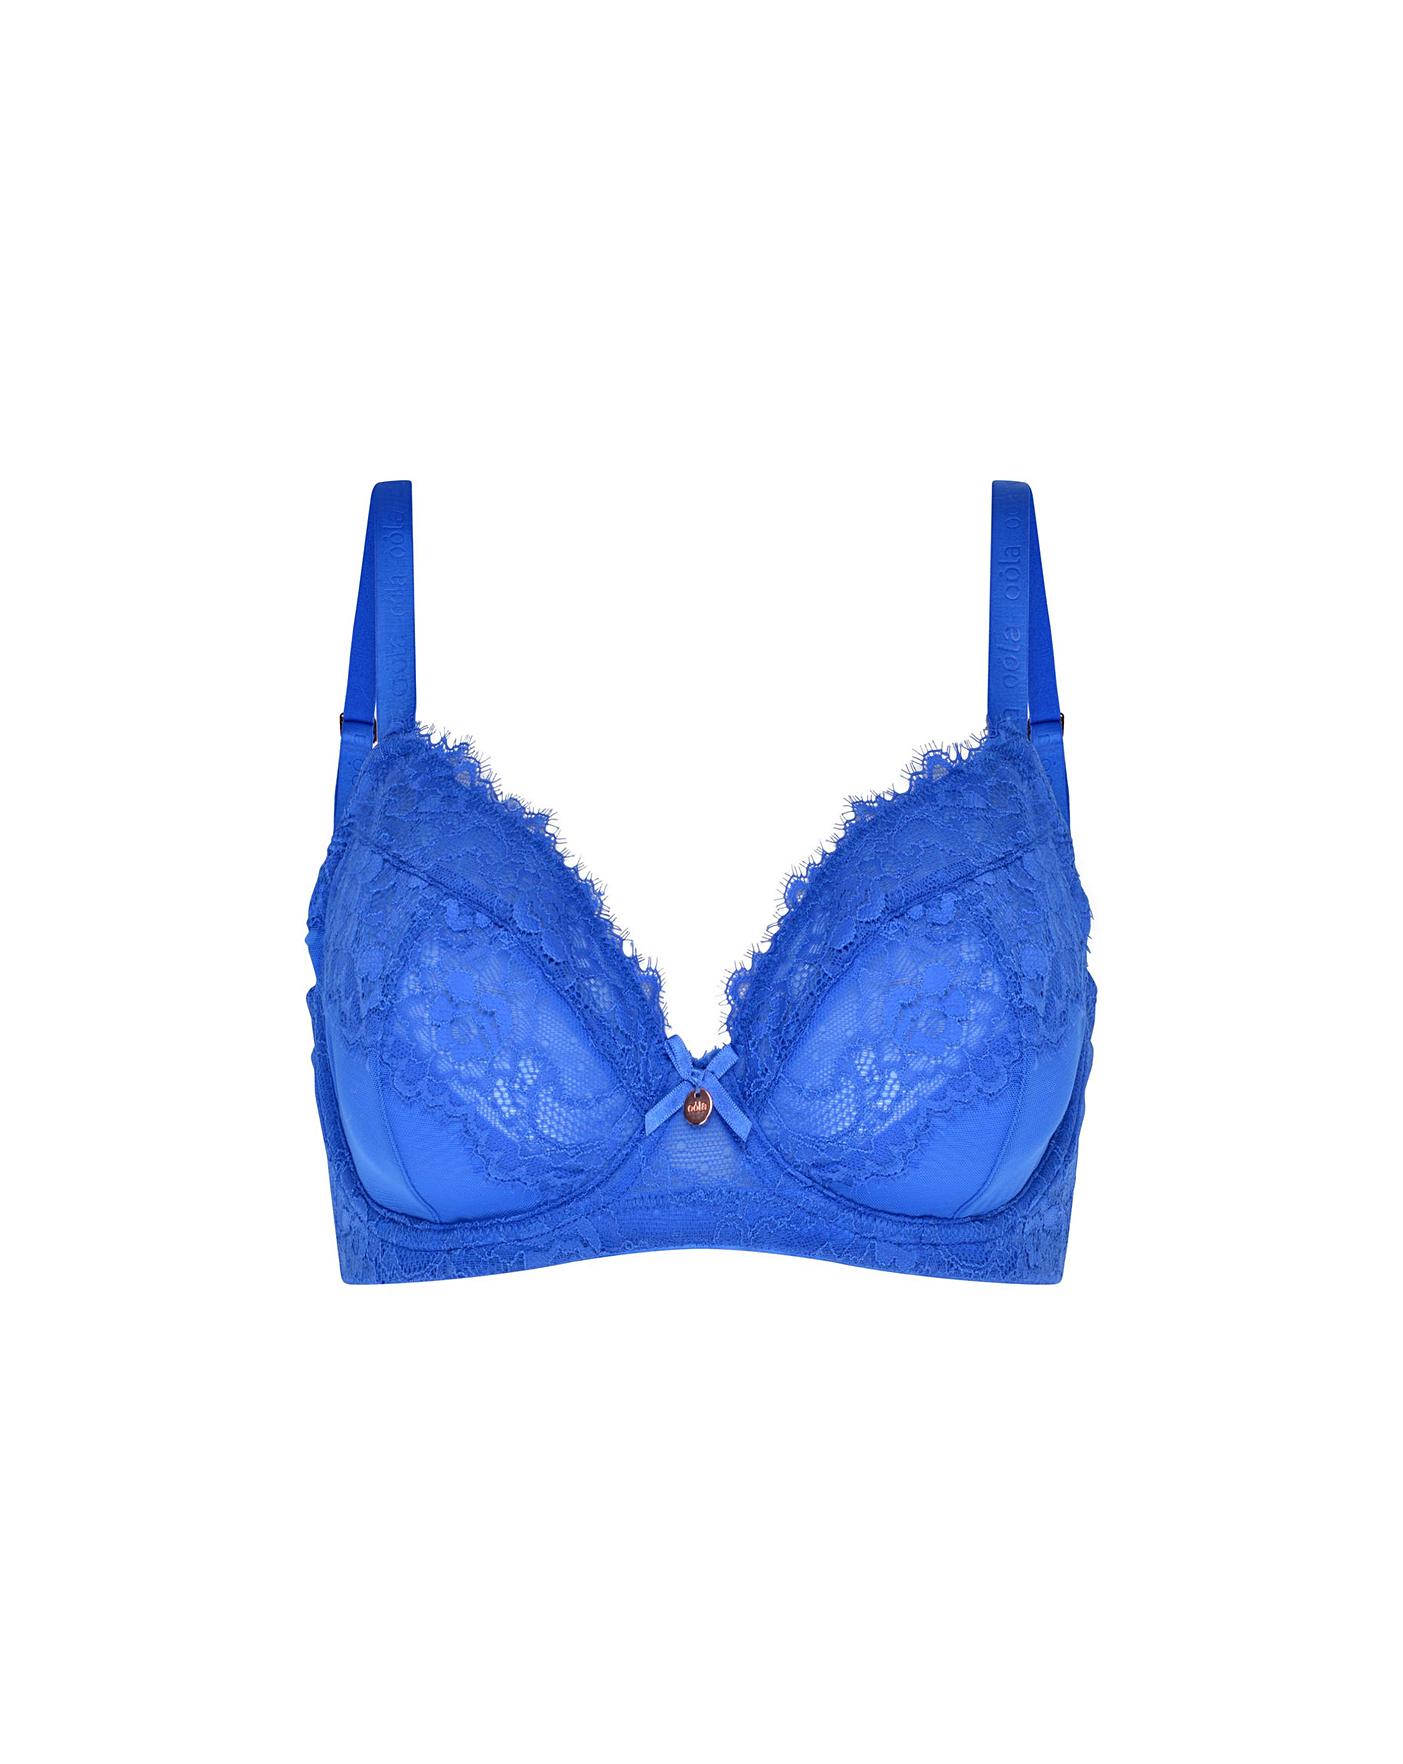 Buy OOLA LINGERIE Lace & Logo Non Wired Soft Bra 38FF, Bras